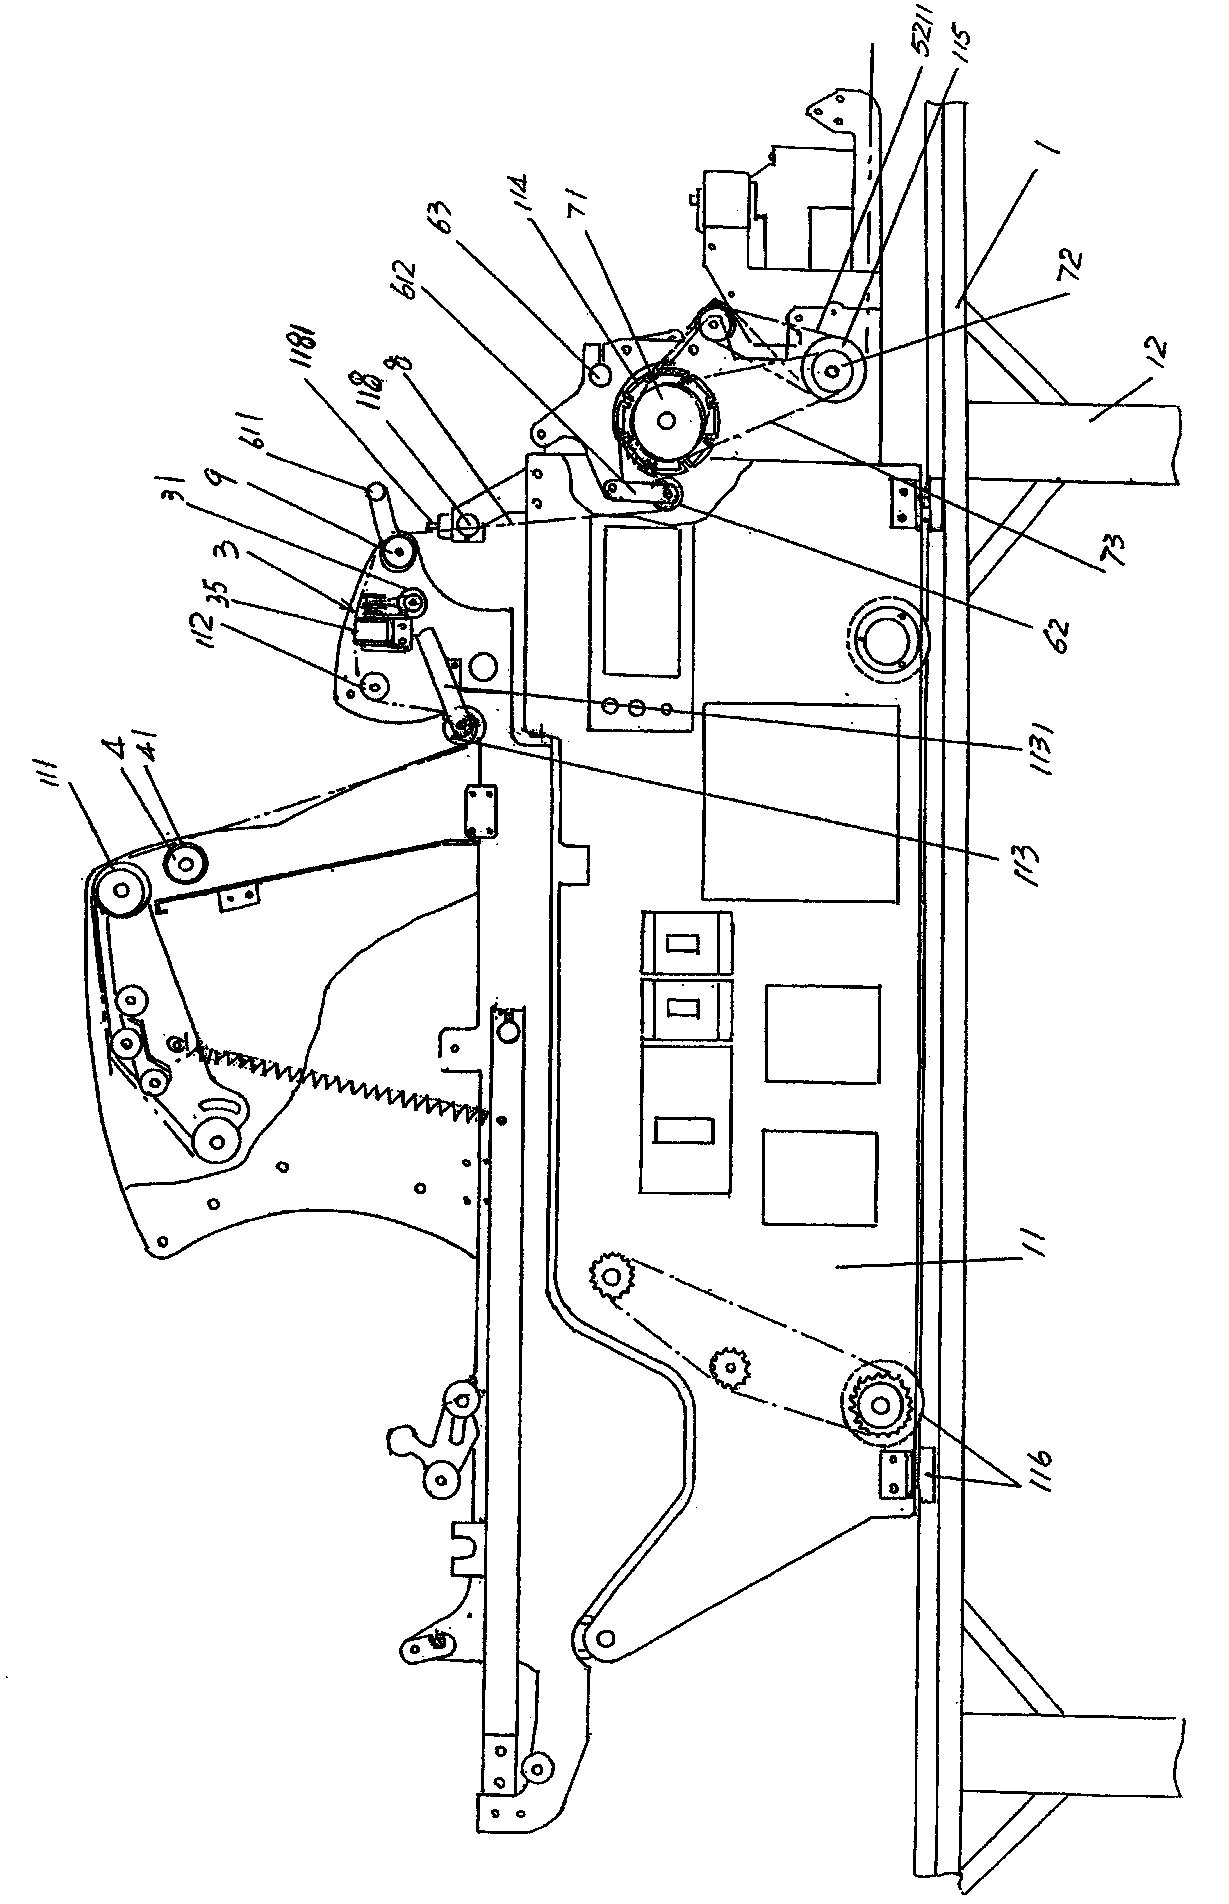 Edge peeling and positioning device of spreading machine